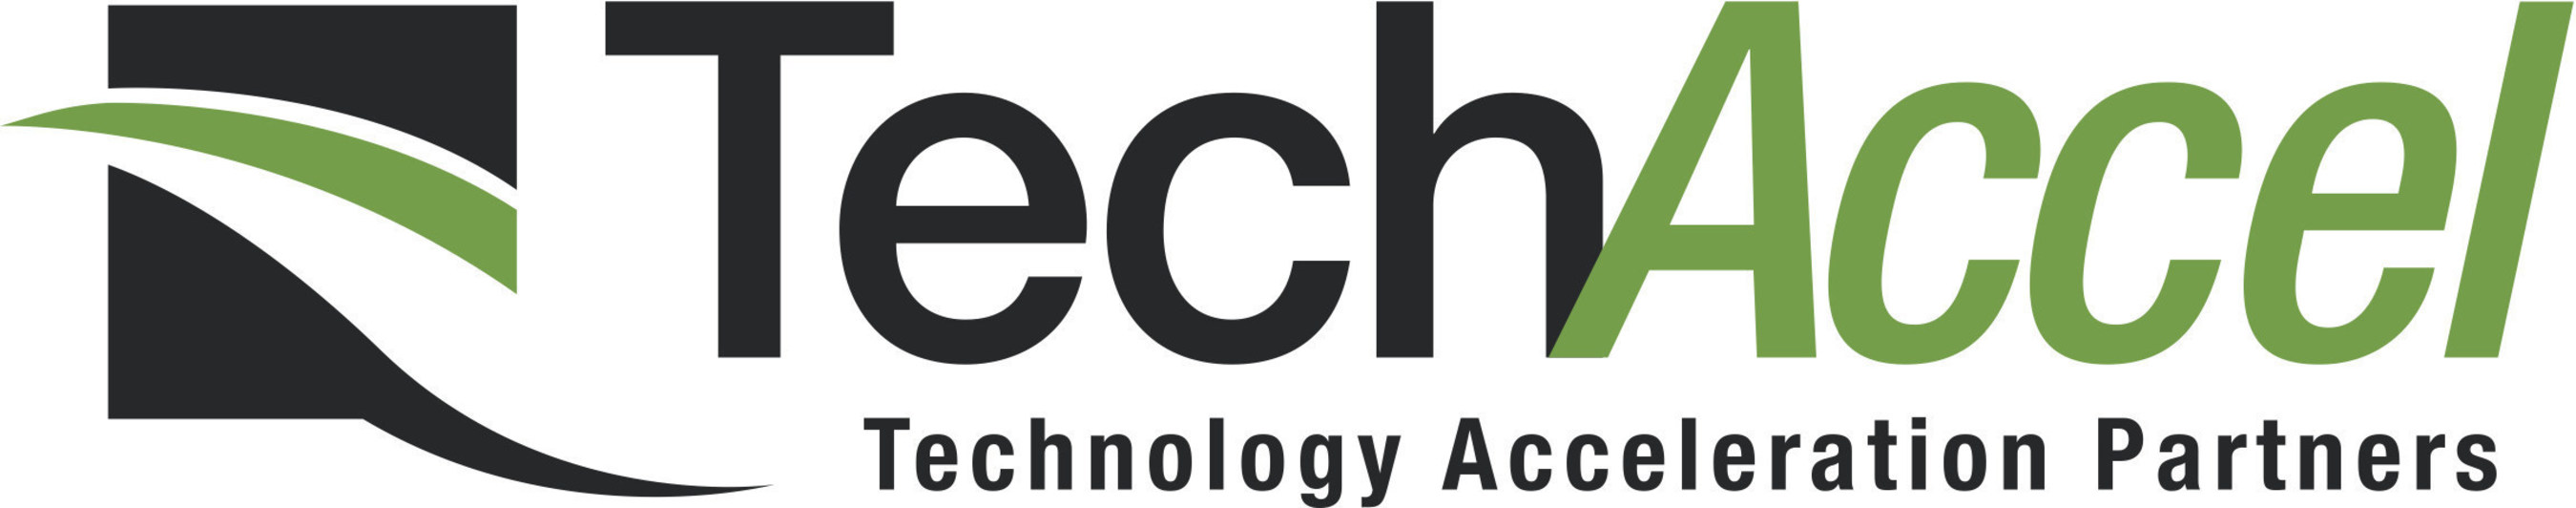 TechAccel invests in, acquires and accelerates early-stage discoveries and technologies in agriculture, animal health and food ingredient sectors